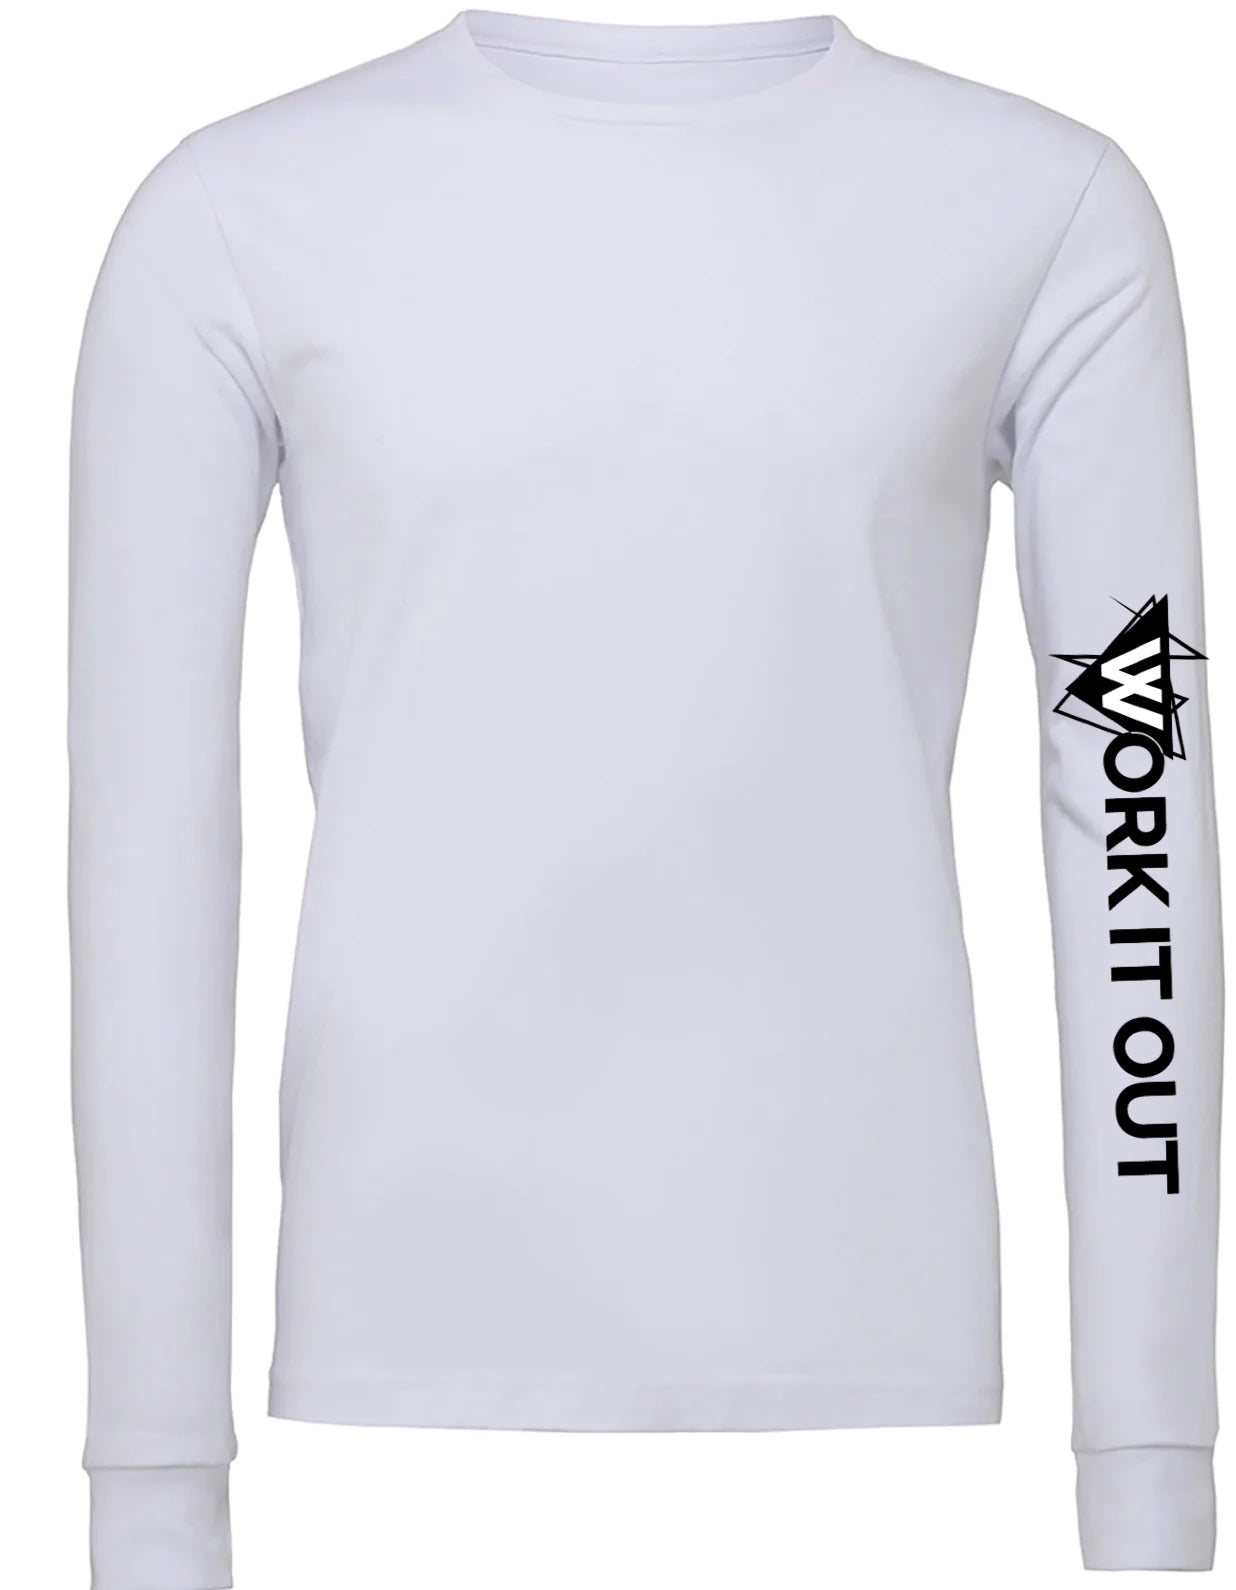 WORK IT OUT LONG SLEEVE TEE